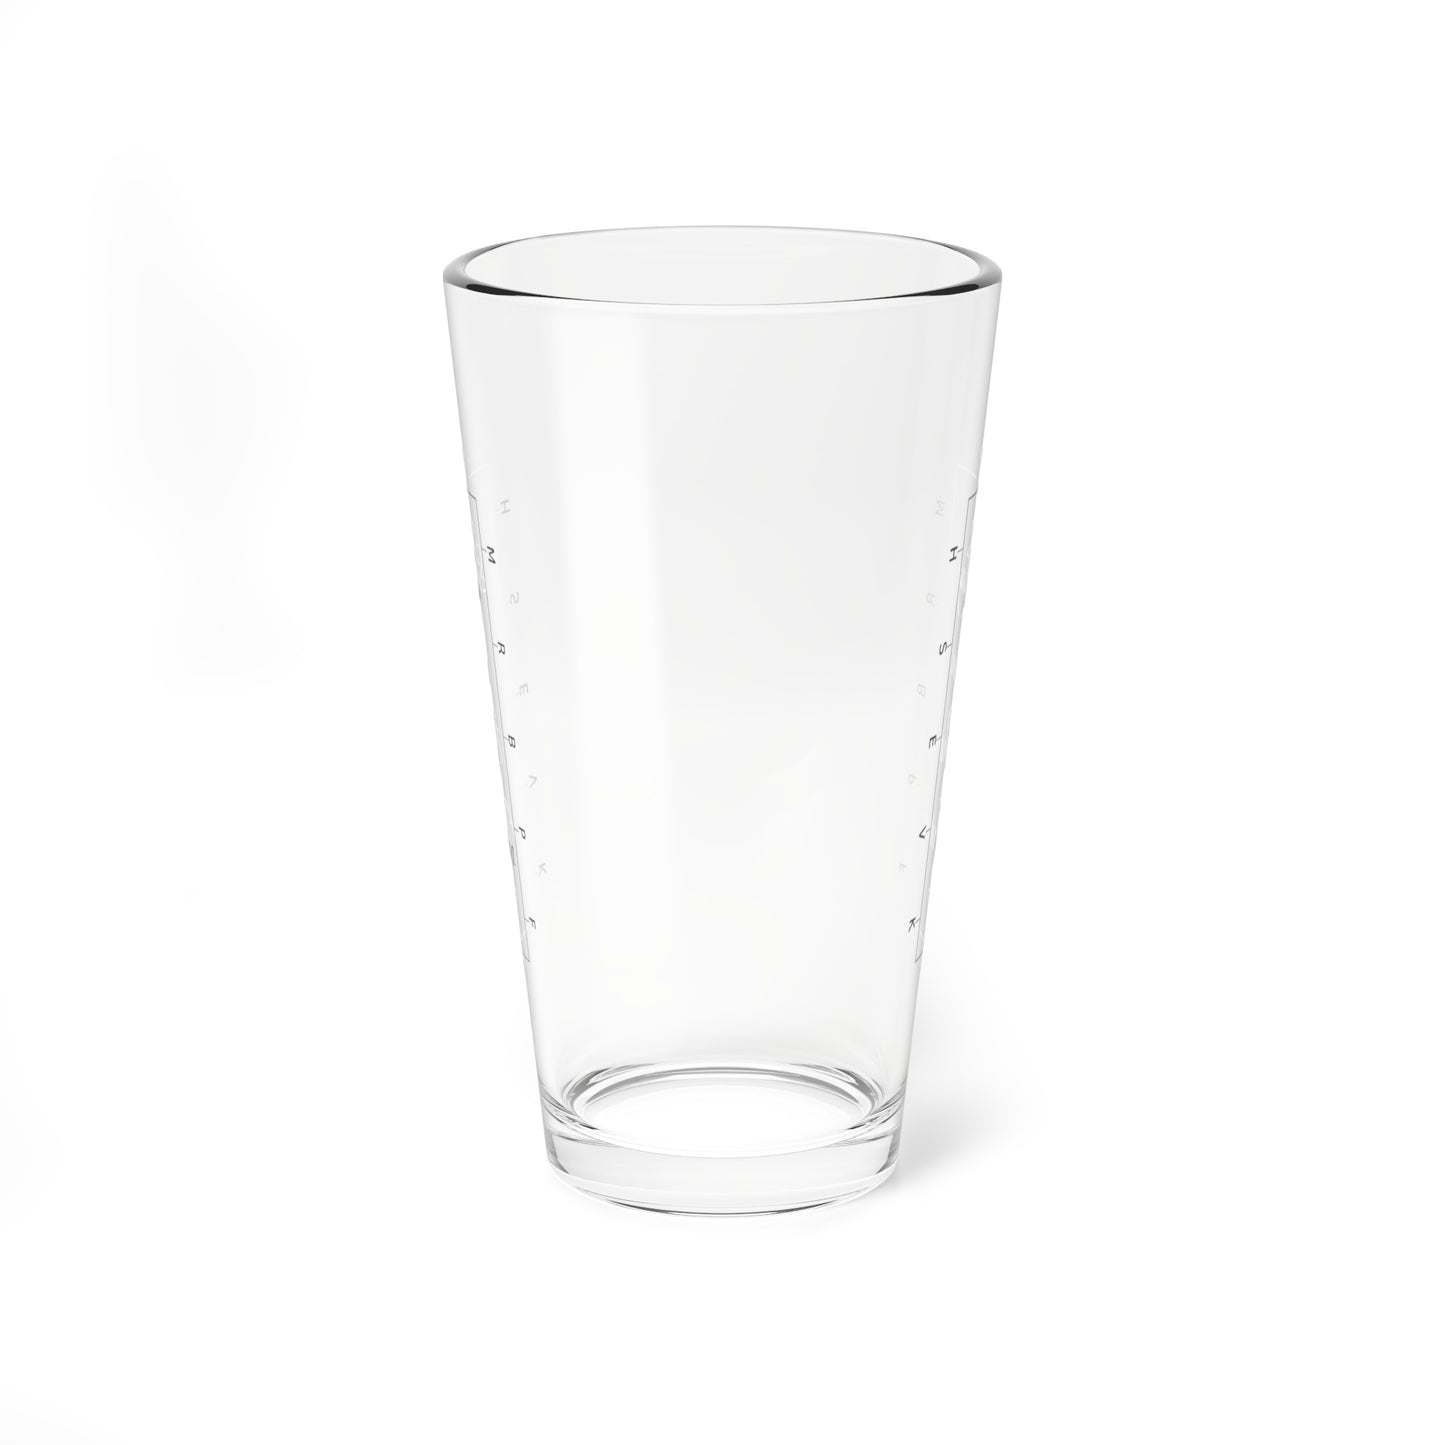 Stay in the Arena Glass, 16oz